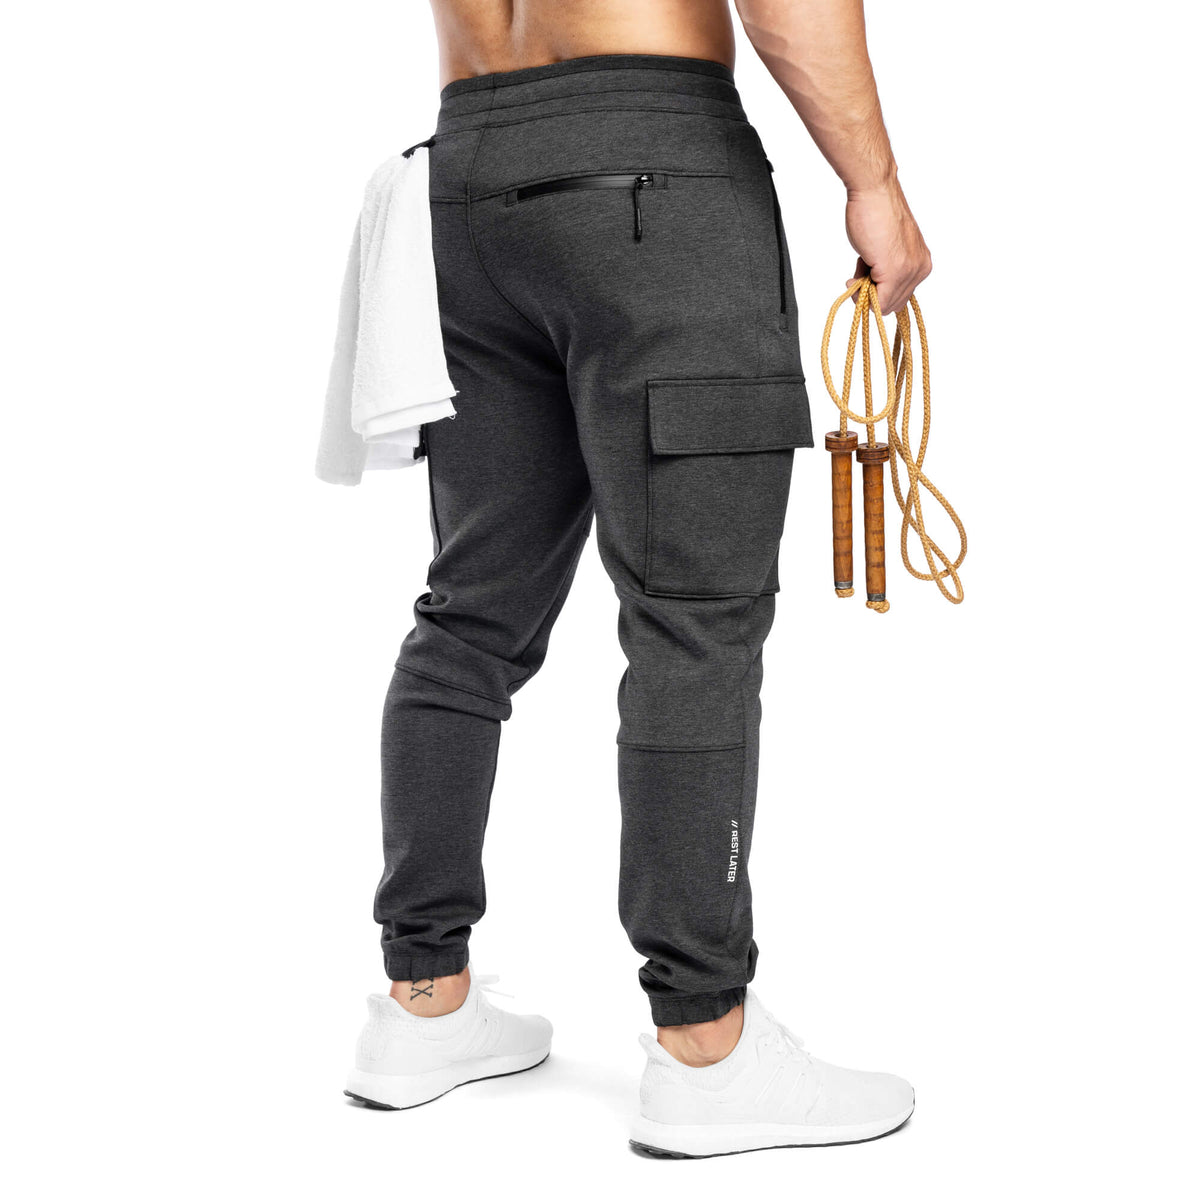 Zuty Tapered Longe Pants Just Dropped and We're Living in Them